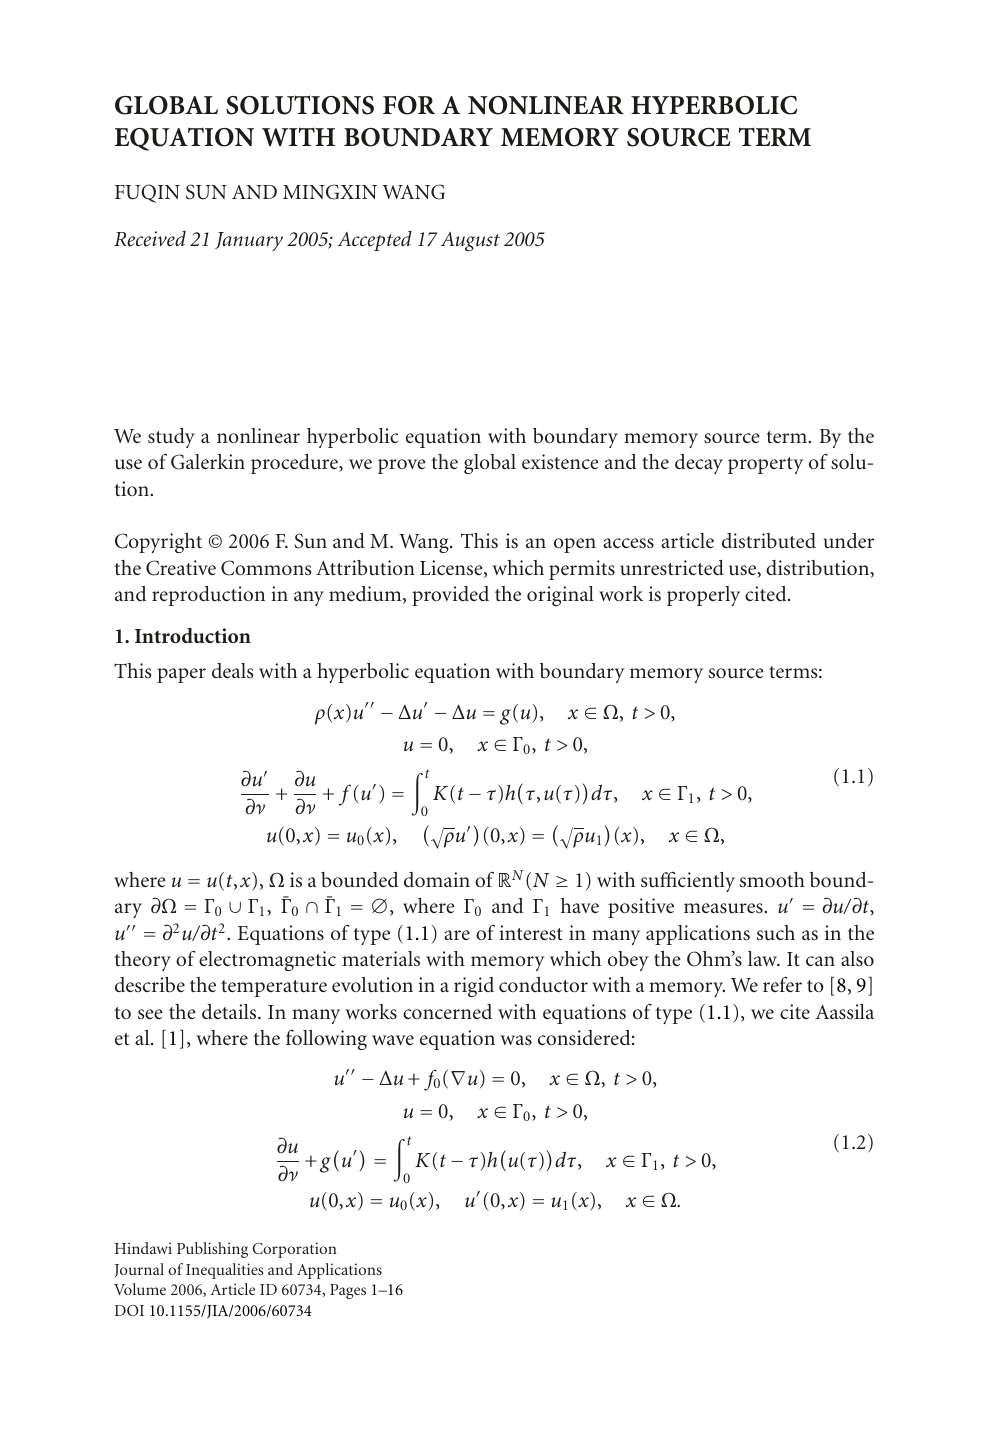 Global Solutions For A Nonlinear Hyperbolic Equation With Boundary Memory Source Term Topic Of Research Paper In Mathematics Download Scholarly Article Pdf And Read For Free On Cyberleninka Open Science Hub